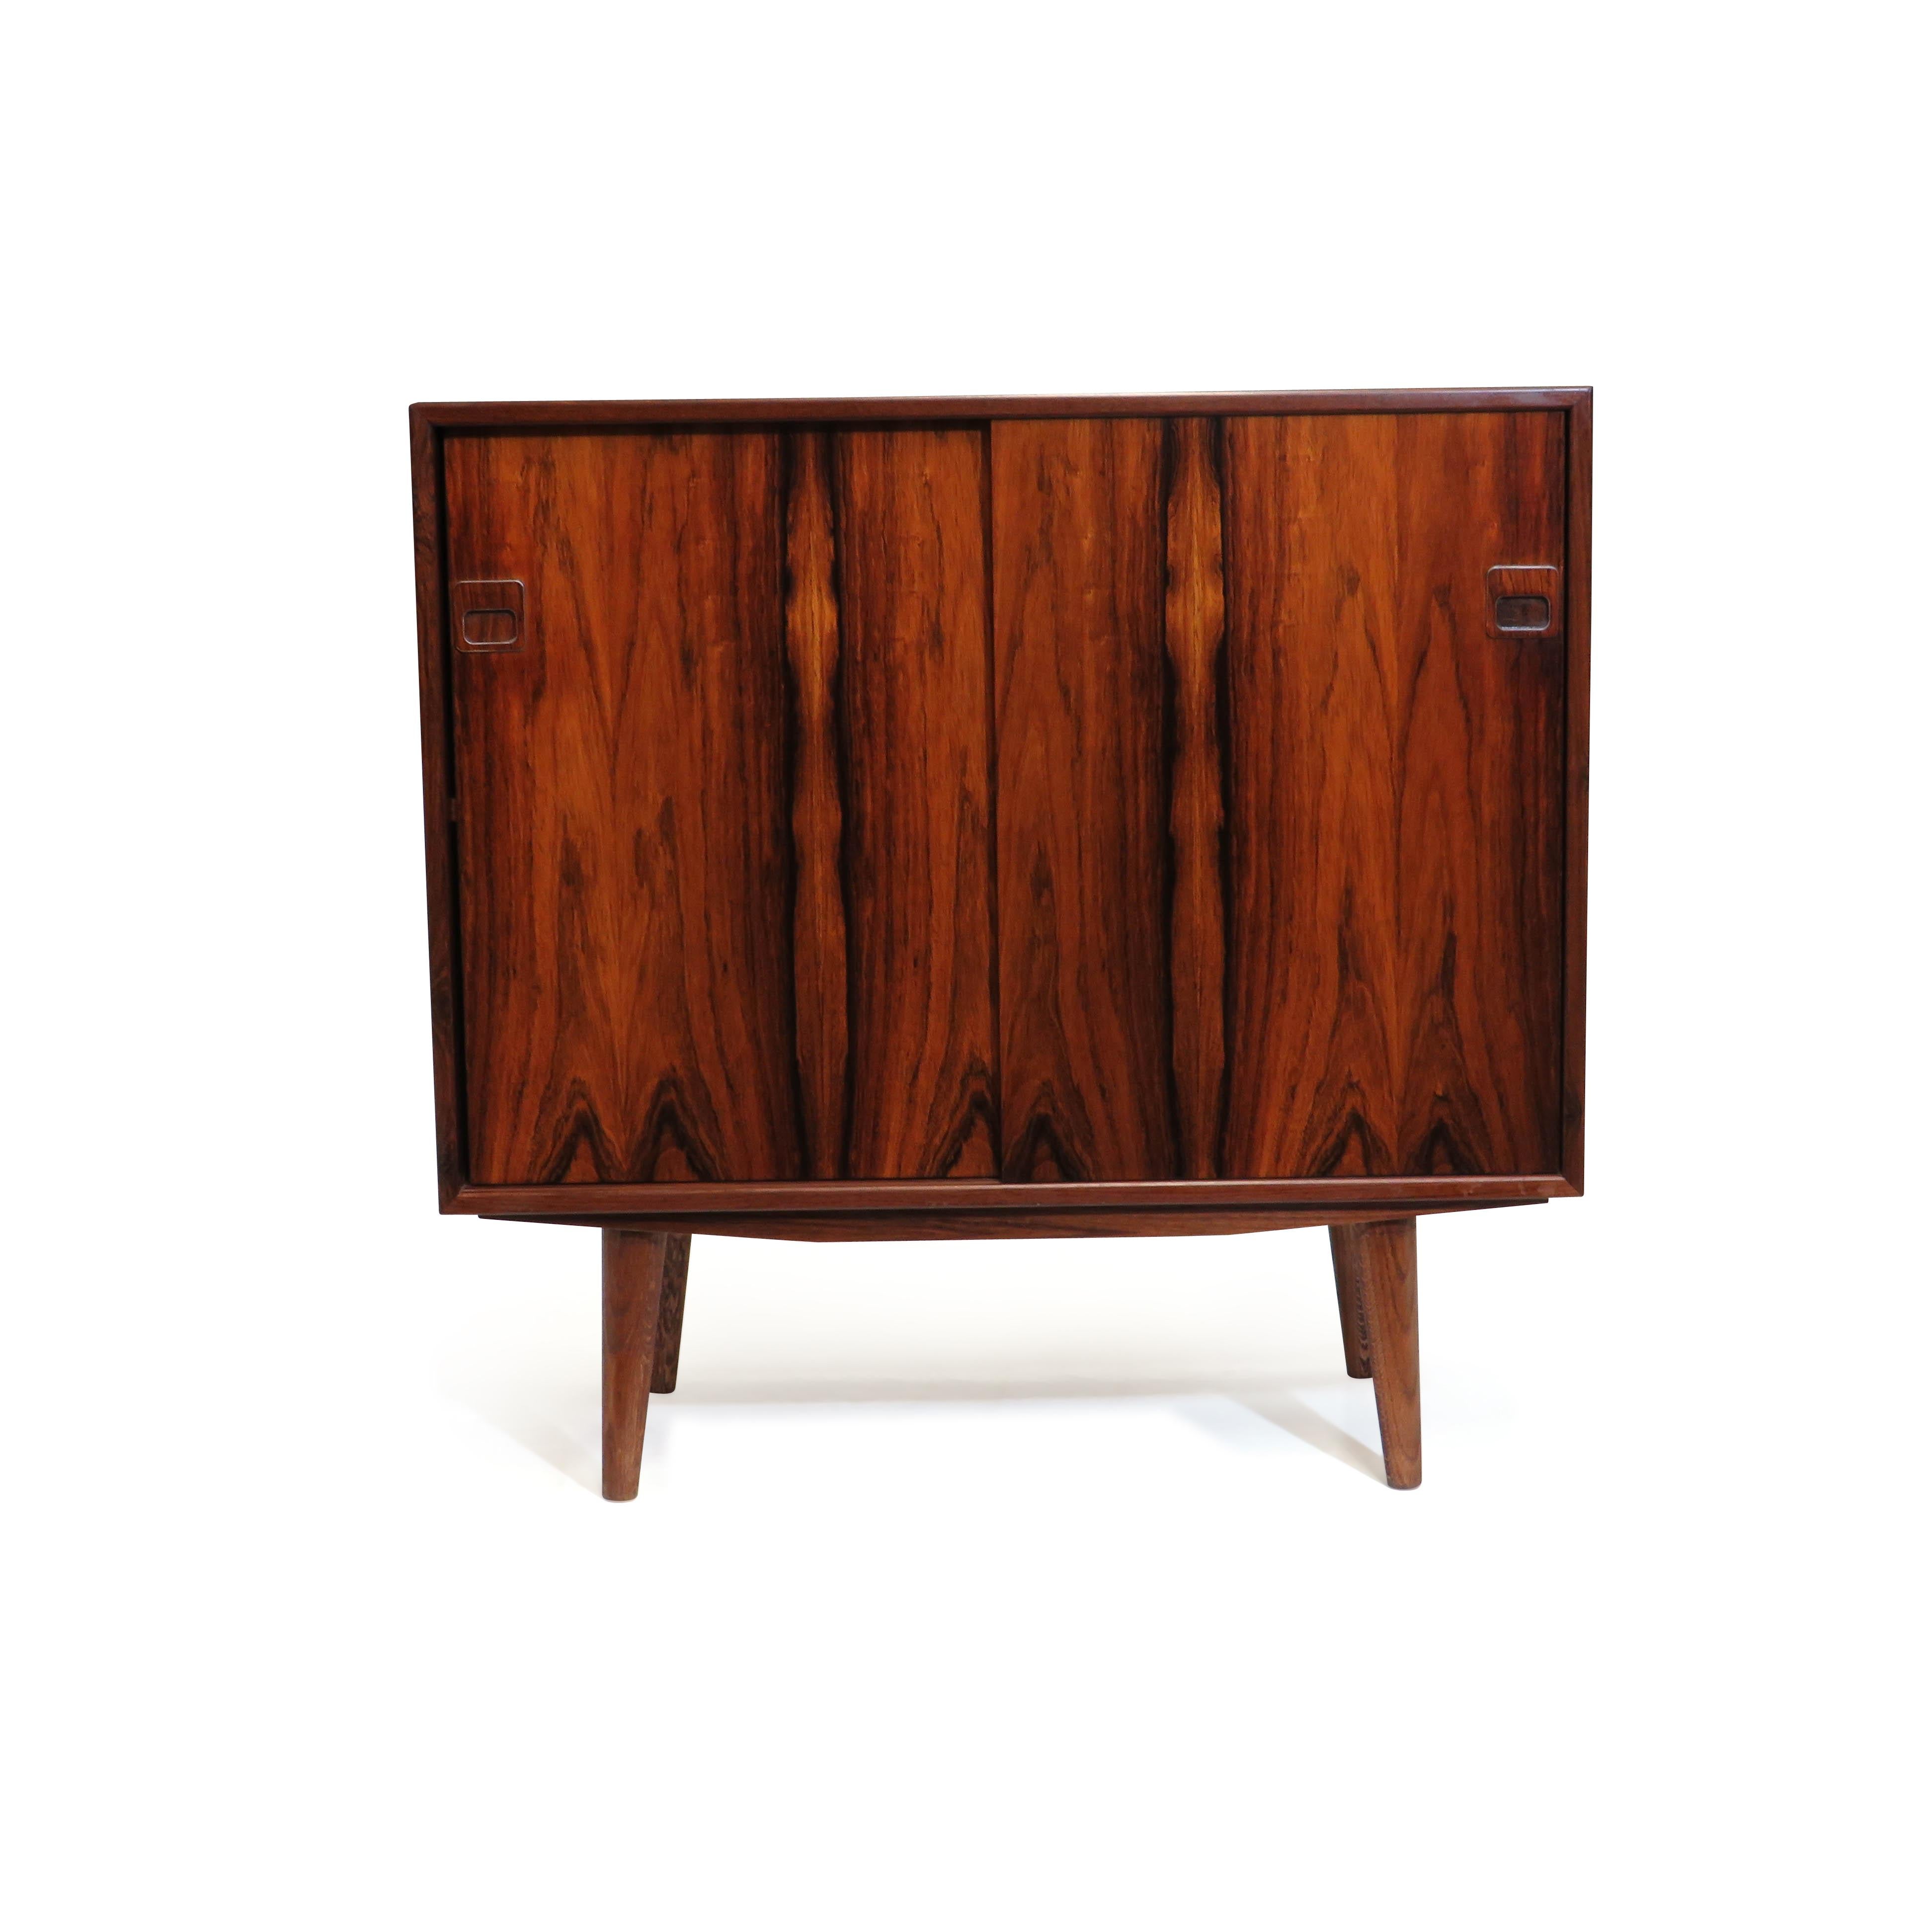 Pair of mid-century cabinets by Hjernebo, Denmark. Finely crafted with matching Brazilian rosewood grain, mitered corners, sculpted pulls with aluminum inlay, and raised on stained oak legs. Cabinet #1 features two sliding doors with an adjustable